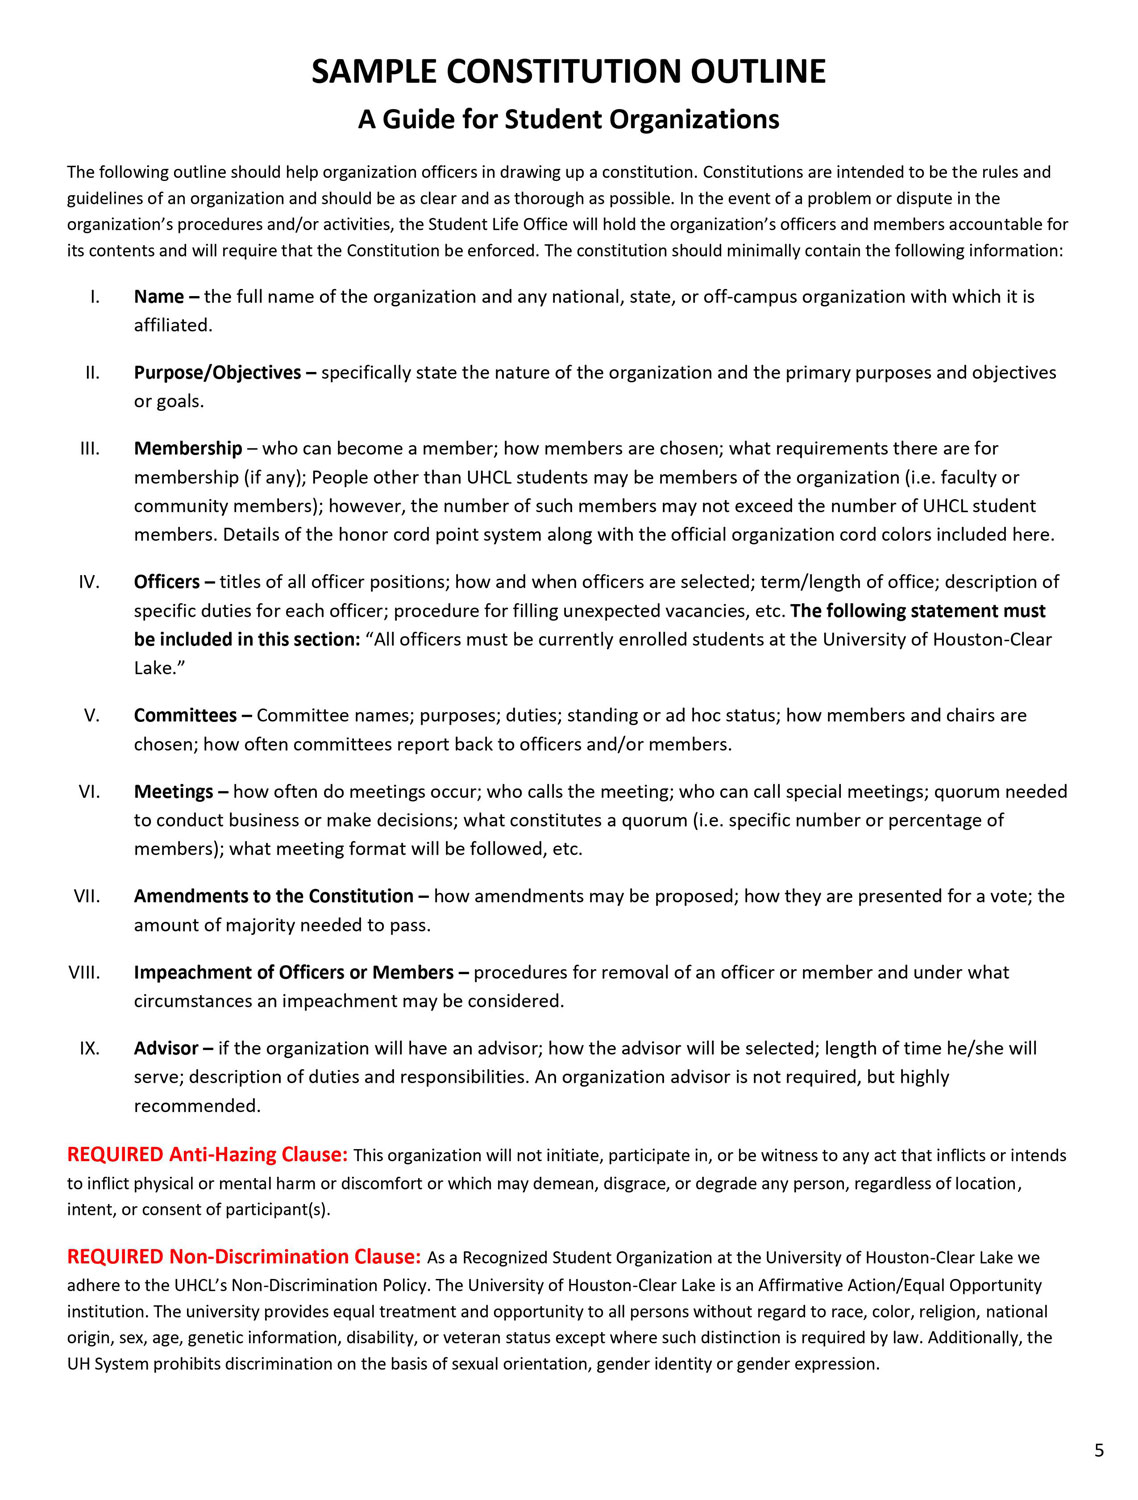 PHOTO: Image shows a sample constitution provided in the Student Organization Recognition Packet. The document shows organizations are required to have a name, purpose, membership, officers, committees, meetings, amendments to the constitution, procedures for how members and officers are to be impeached, an advisor and acknowledgement of the required anti-having and non-discrimination clauses. Image courtesy of Student Involvement and Leadership.